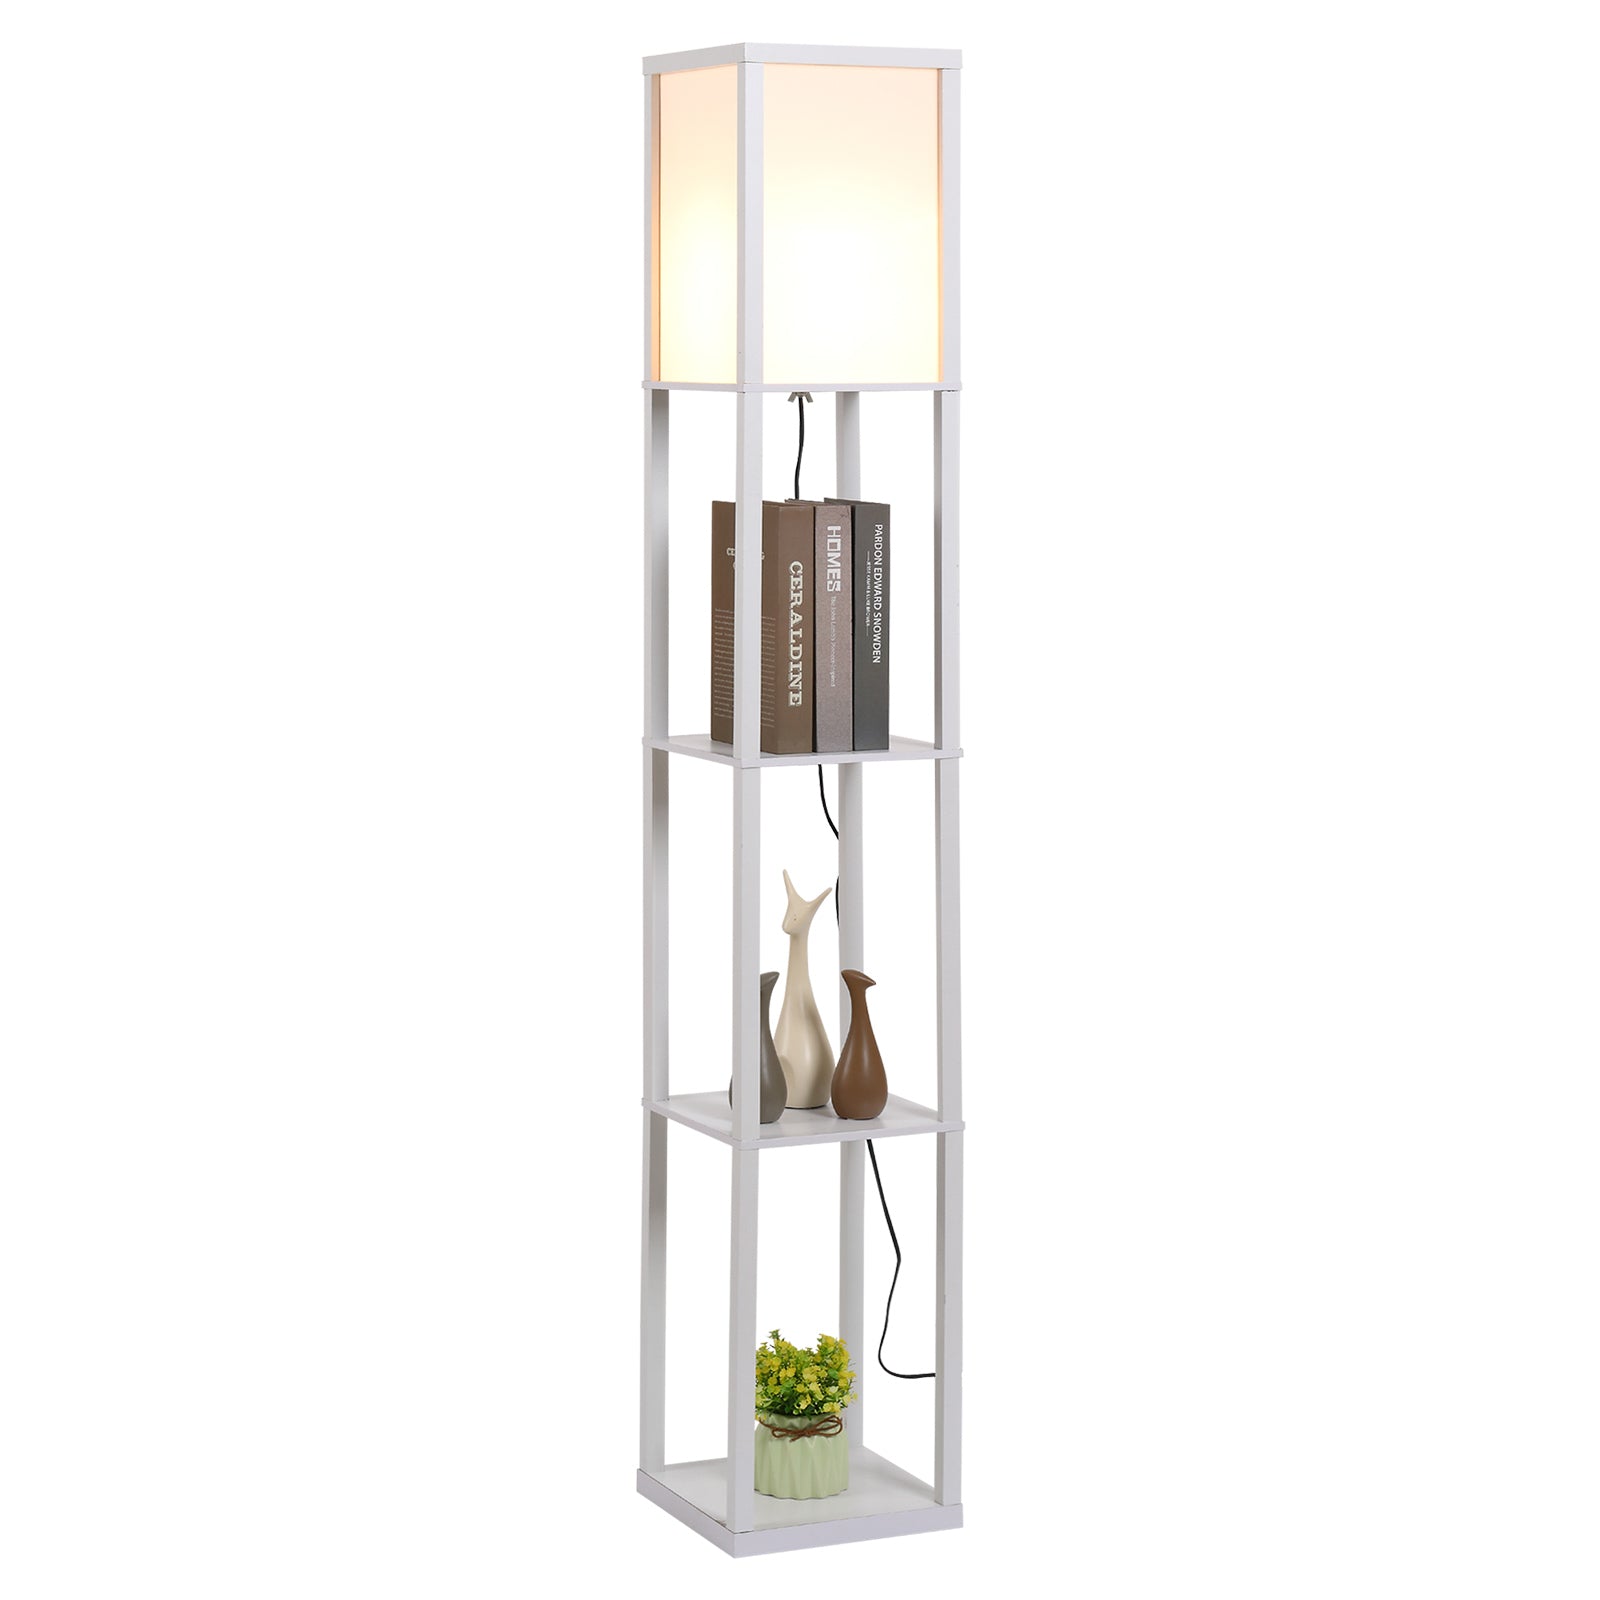 HOMCOM Floor Lamp Reading Lamp with 3-Tier Storage Shelf for Home Office White  | TJ Hughes